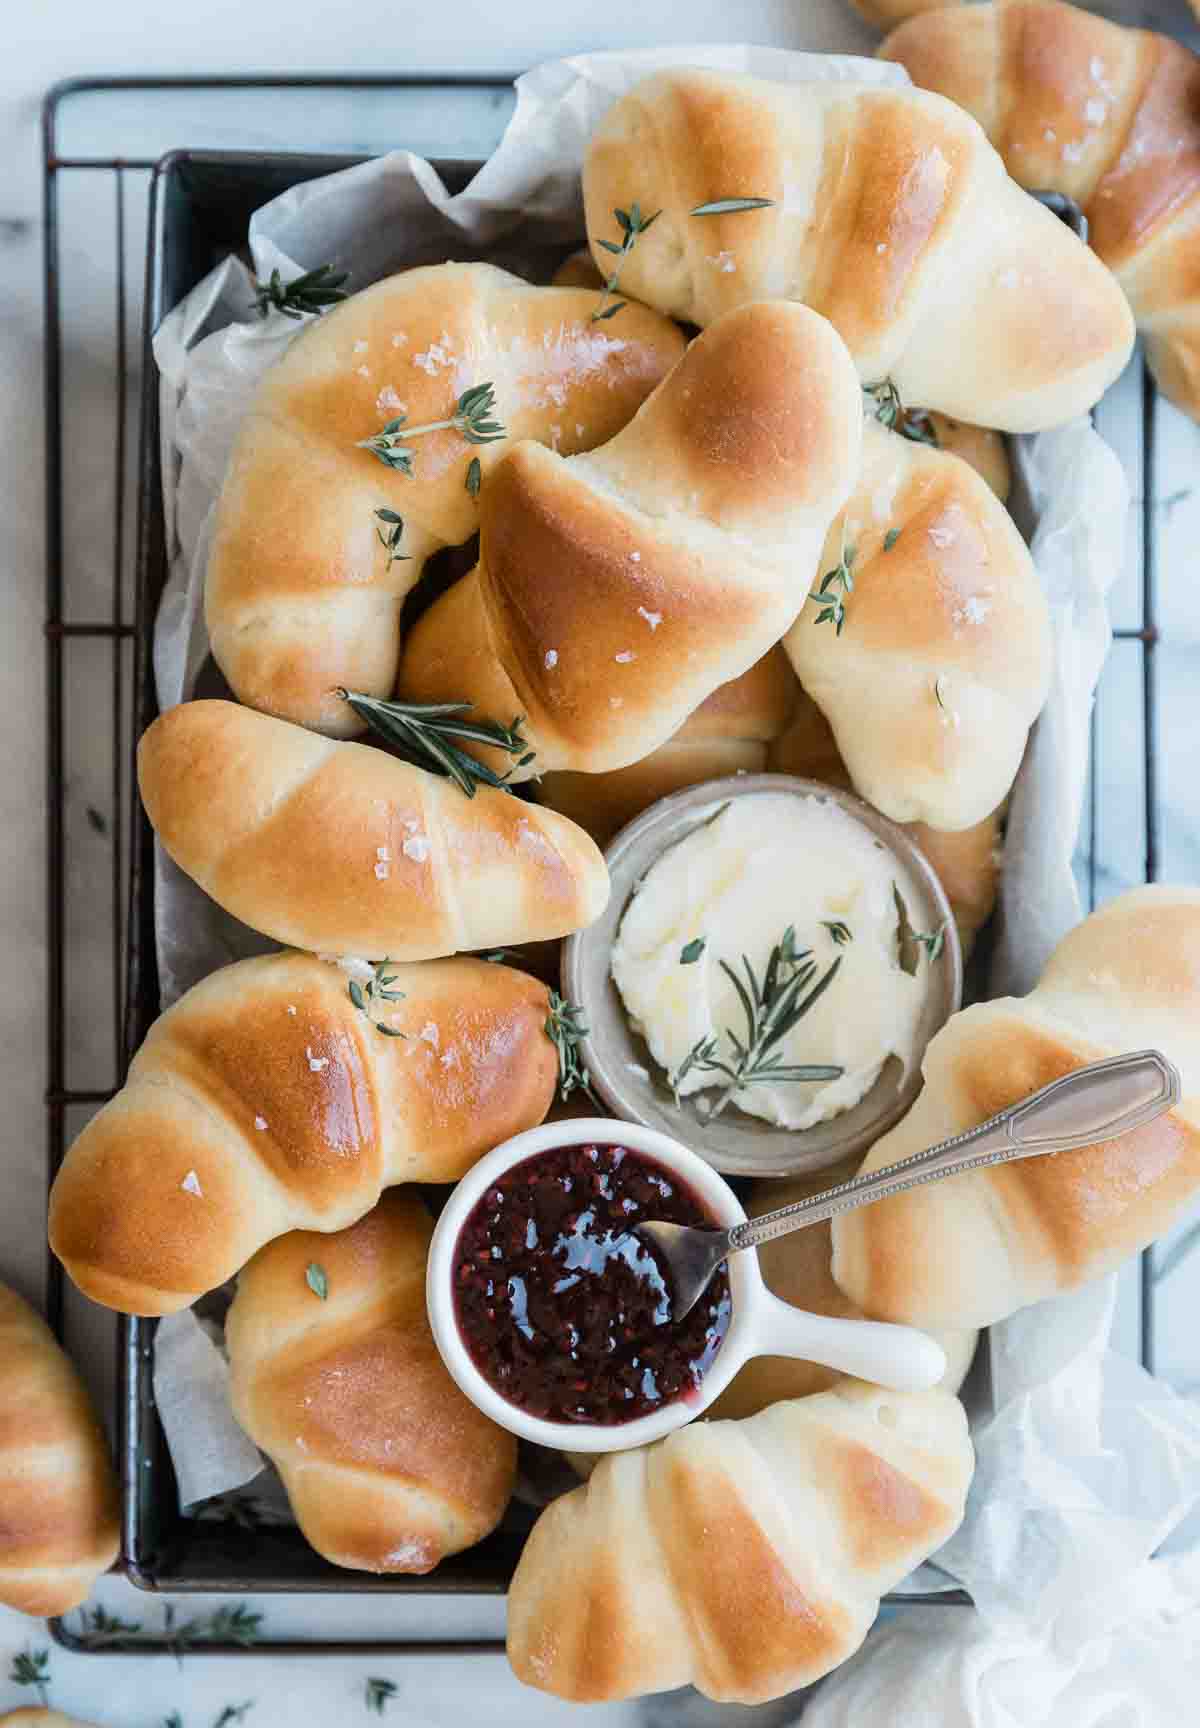 Easy crescent roll recipe rolls in a metal baking tray. There are small bowls of butter and jam nestled in the jam.